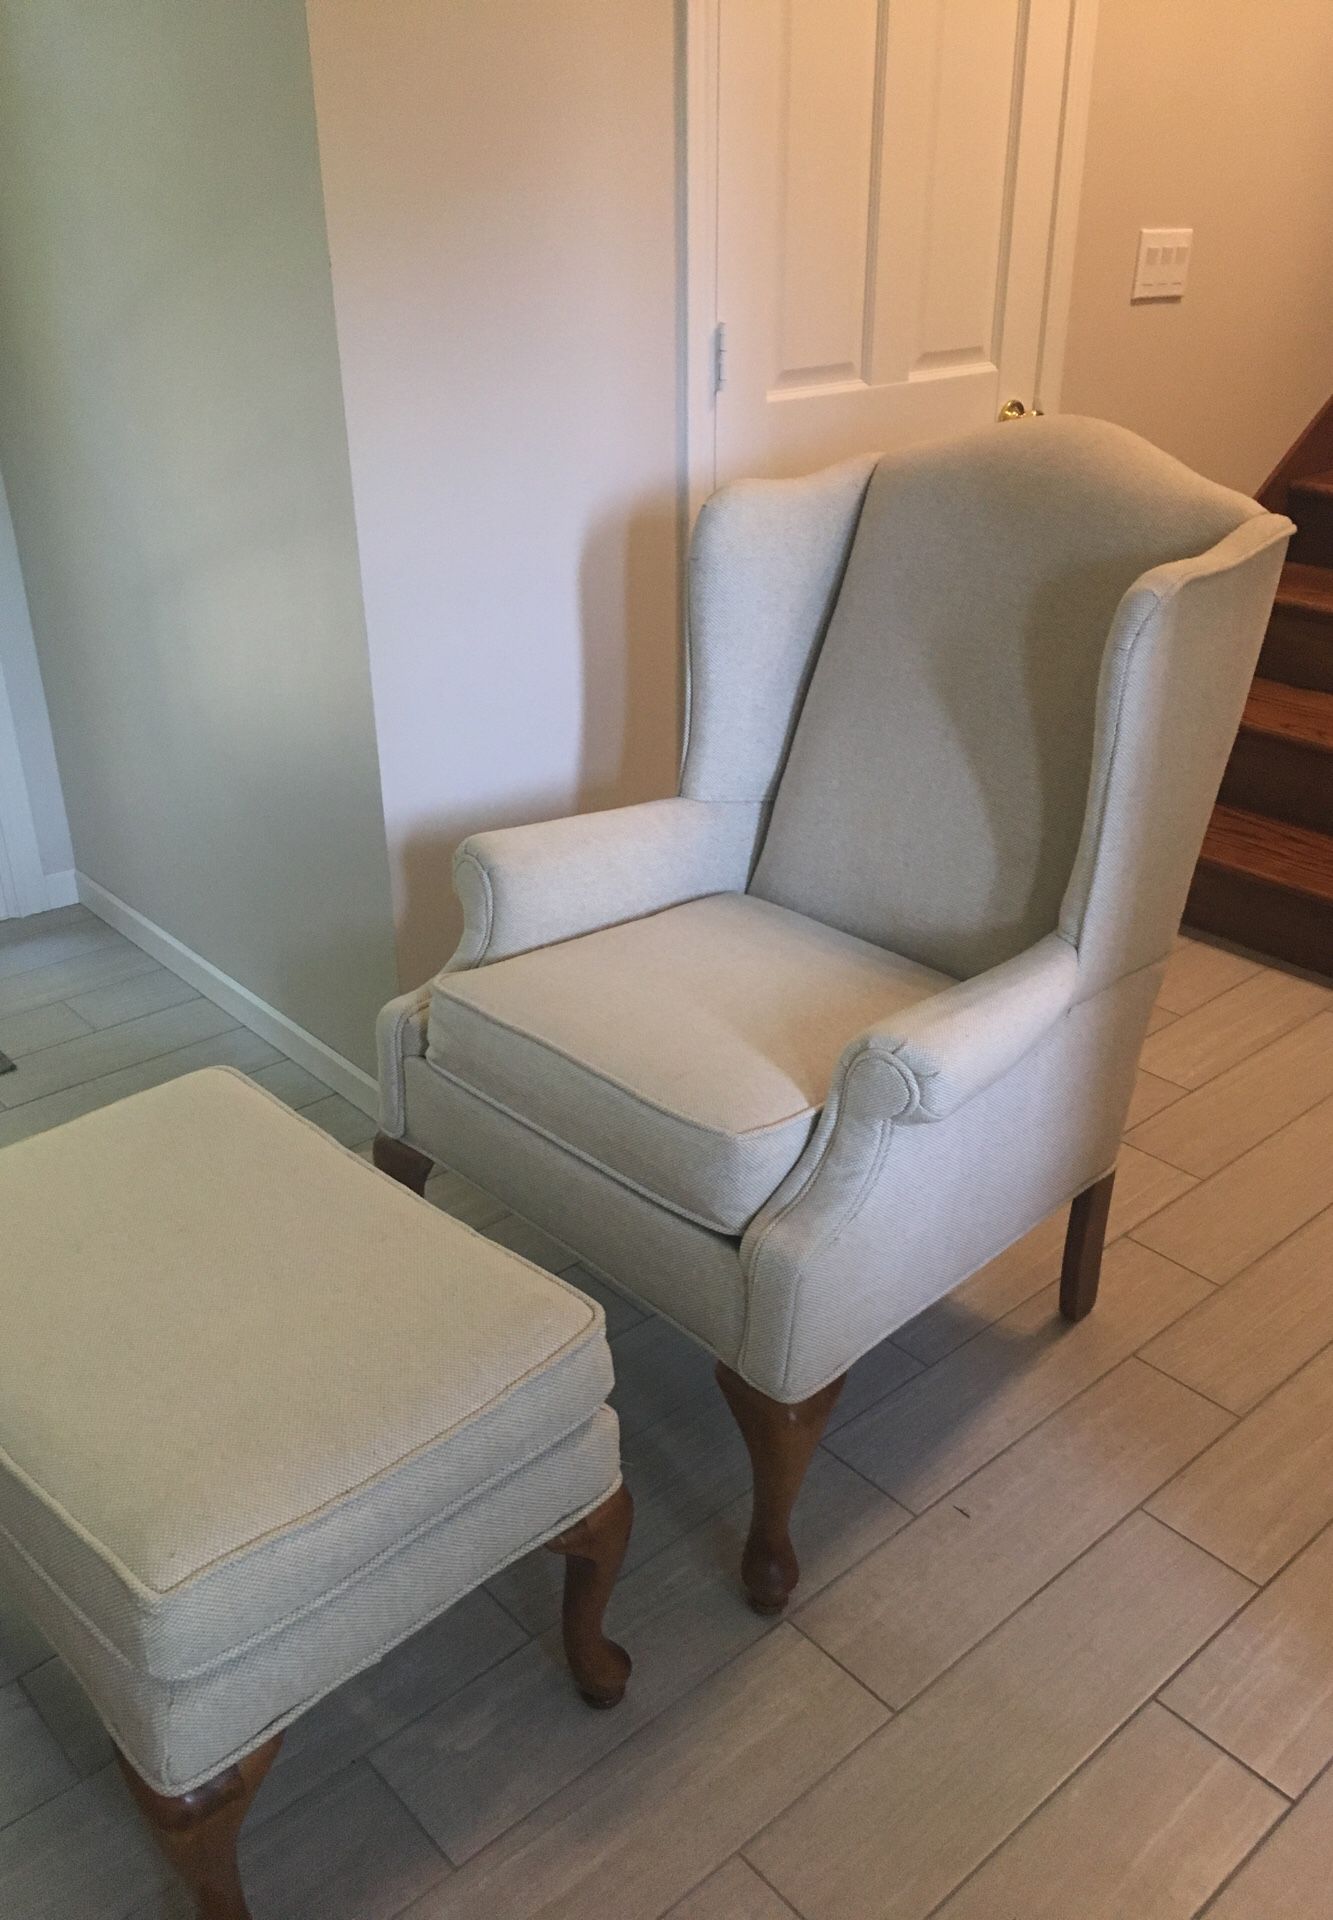 Queen Anne chair with ottoman